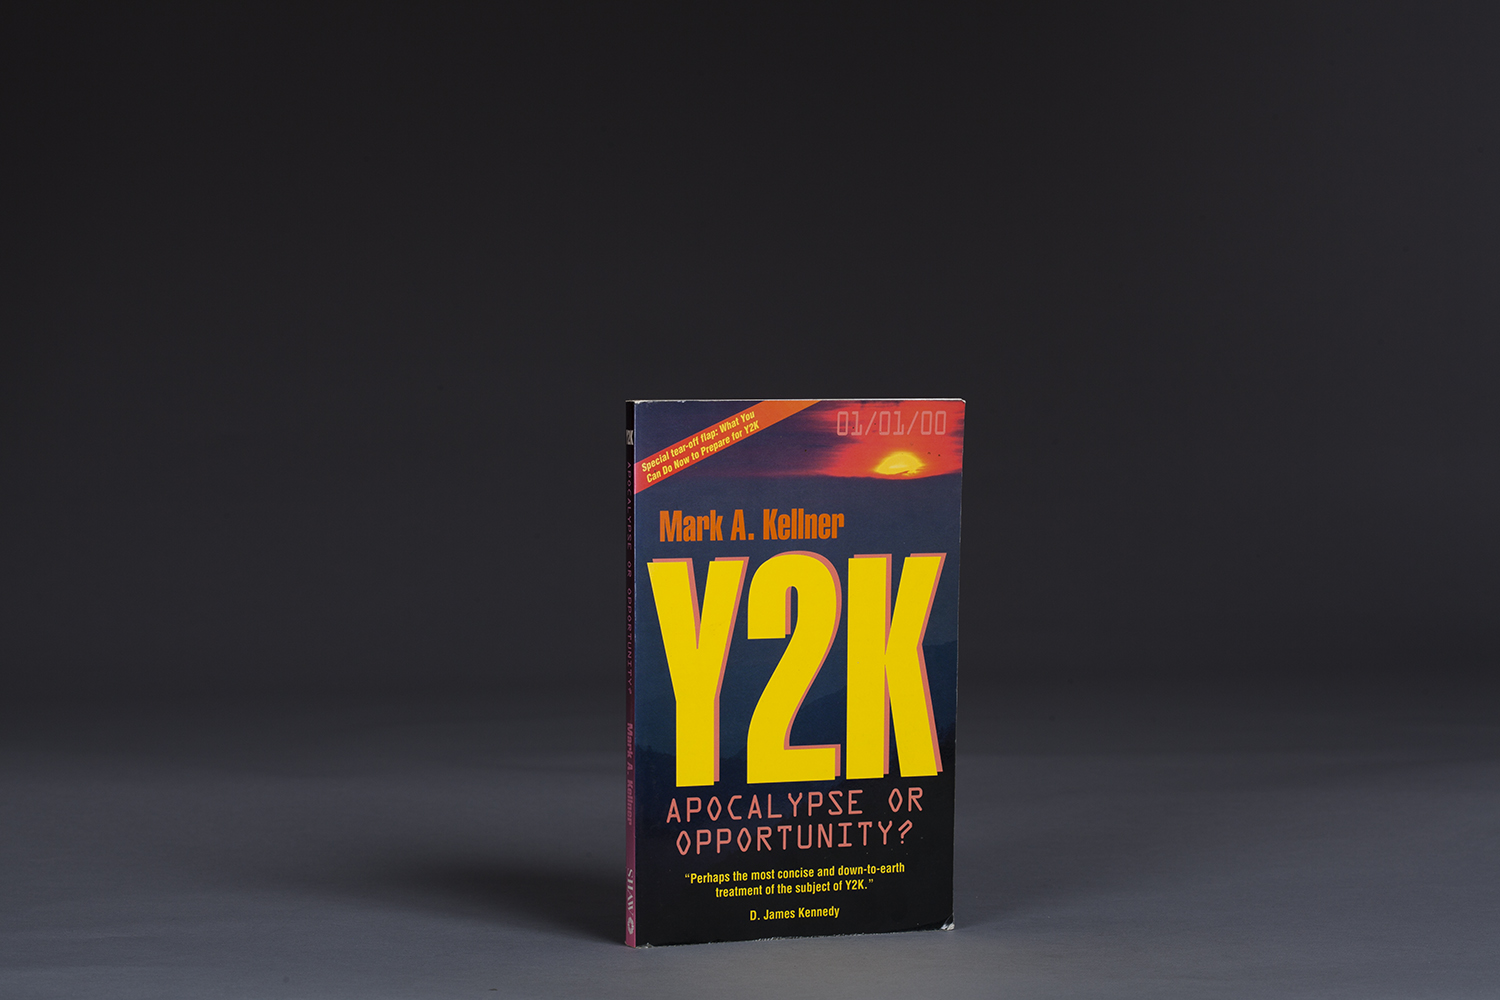 Y2K Apocalypse or Opportunity? - 0041 Cover.jpg